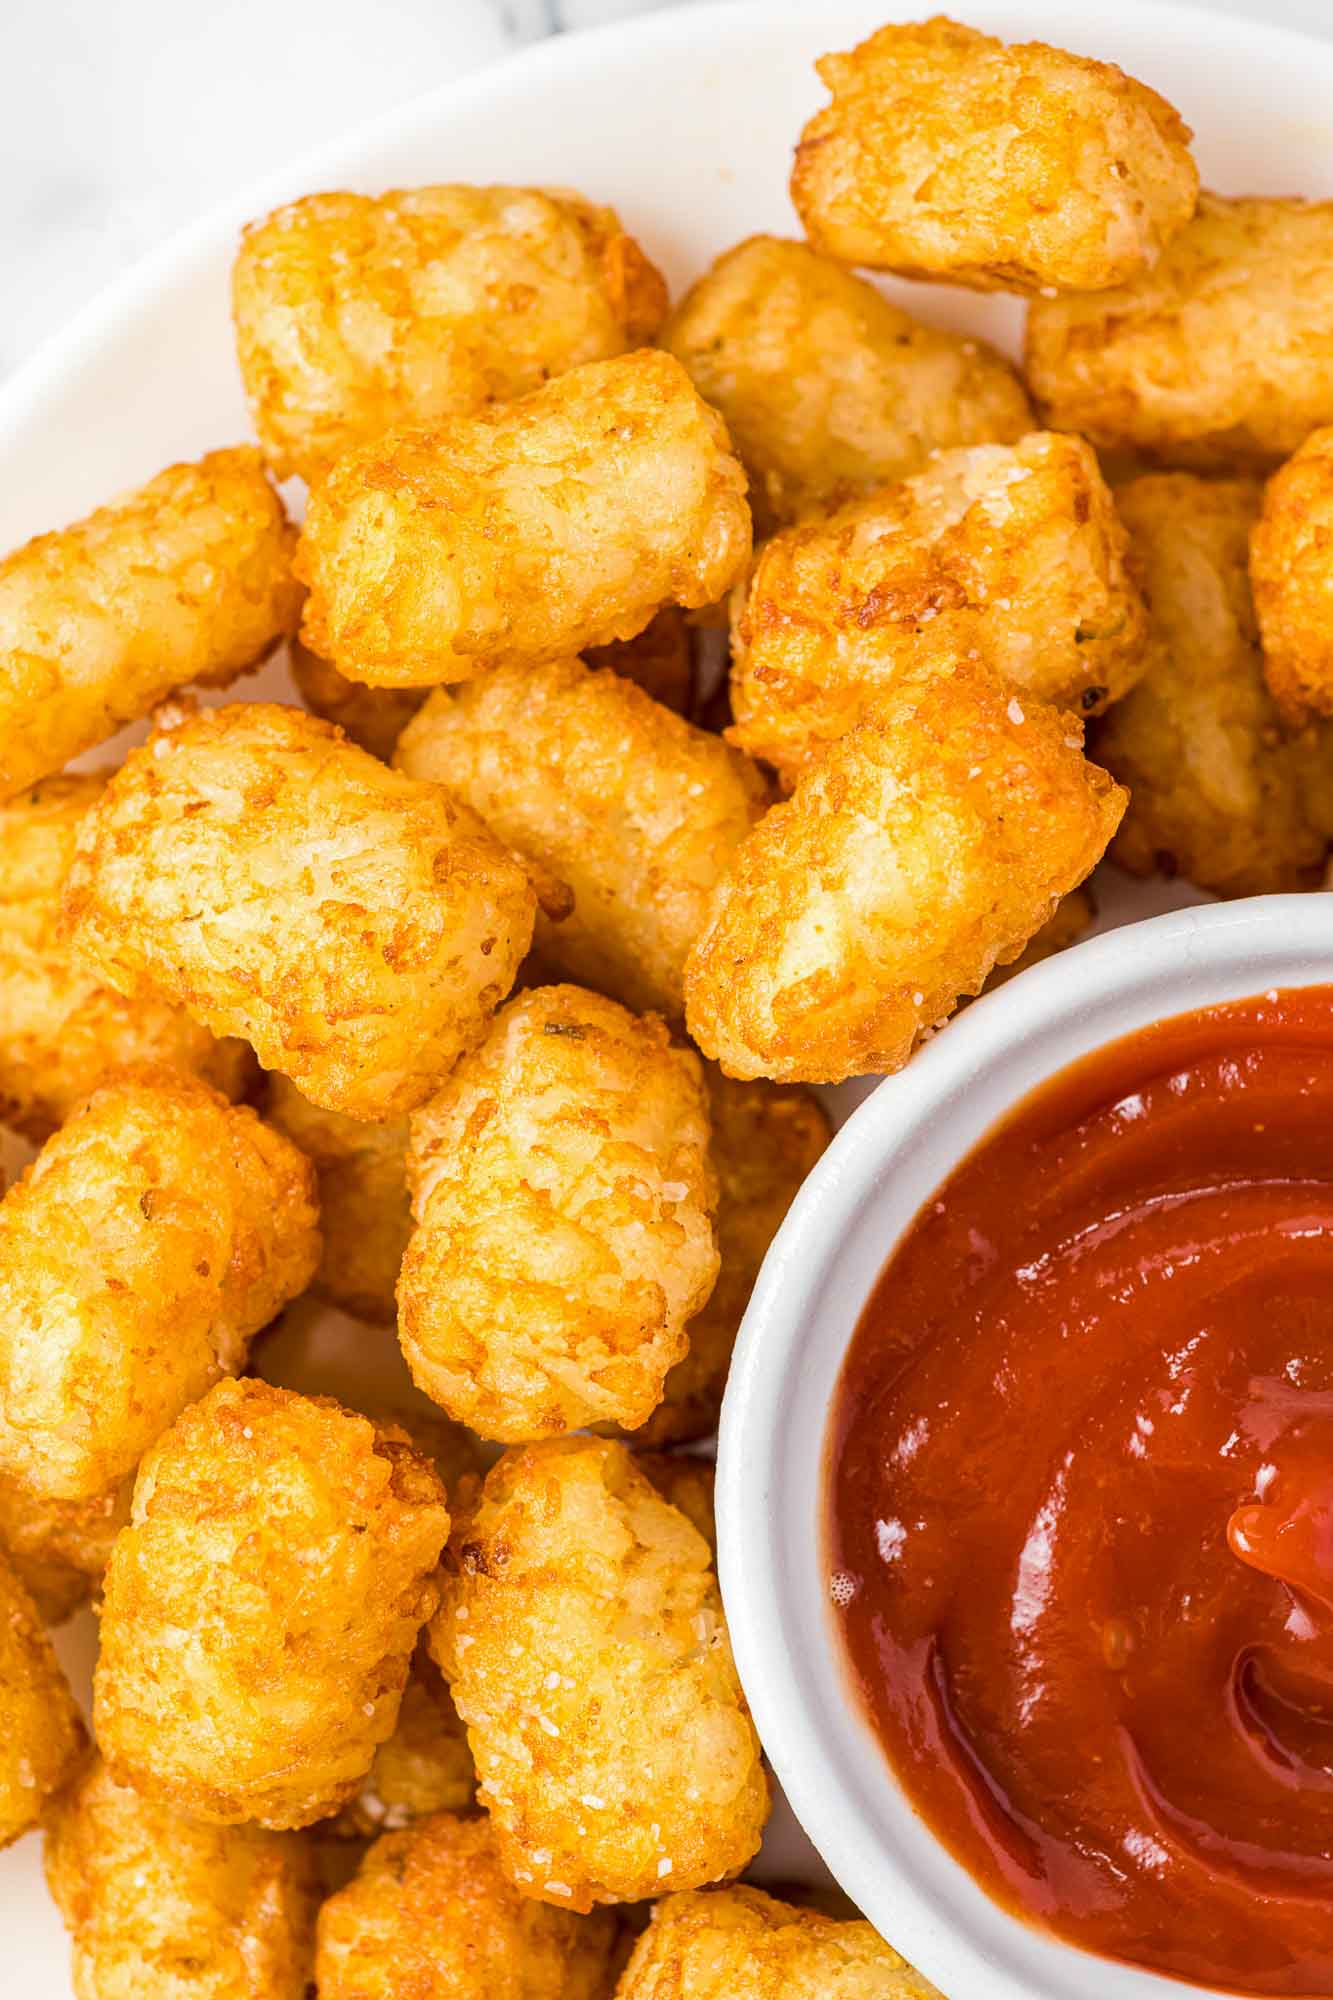 Overhead shot of crispy golden tater tots served with a small bowl of ketchup.